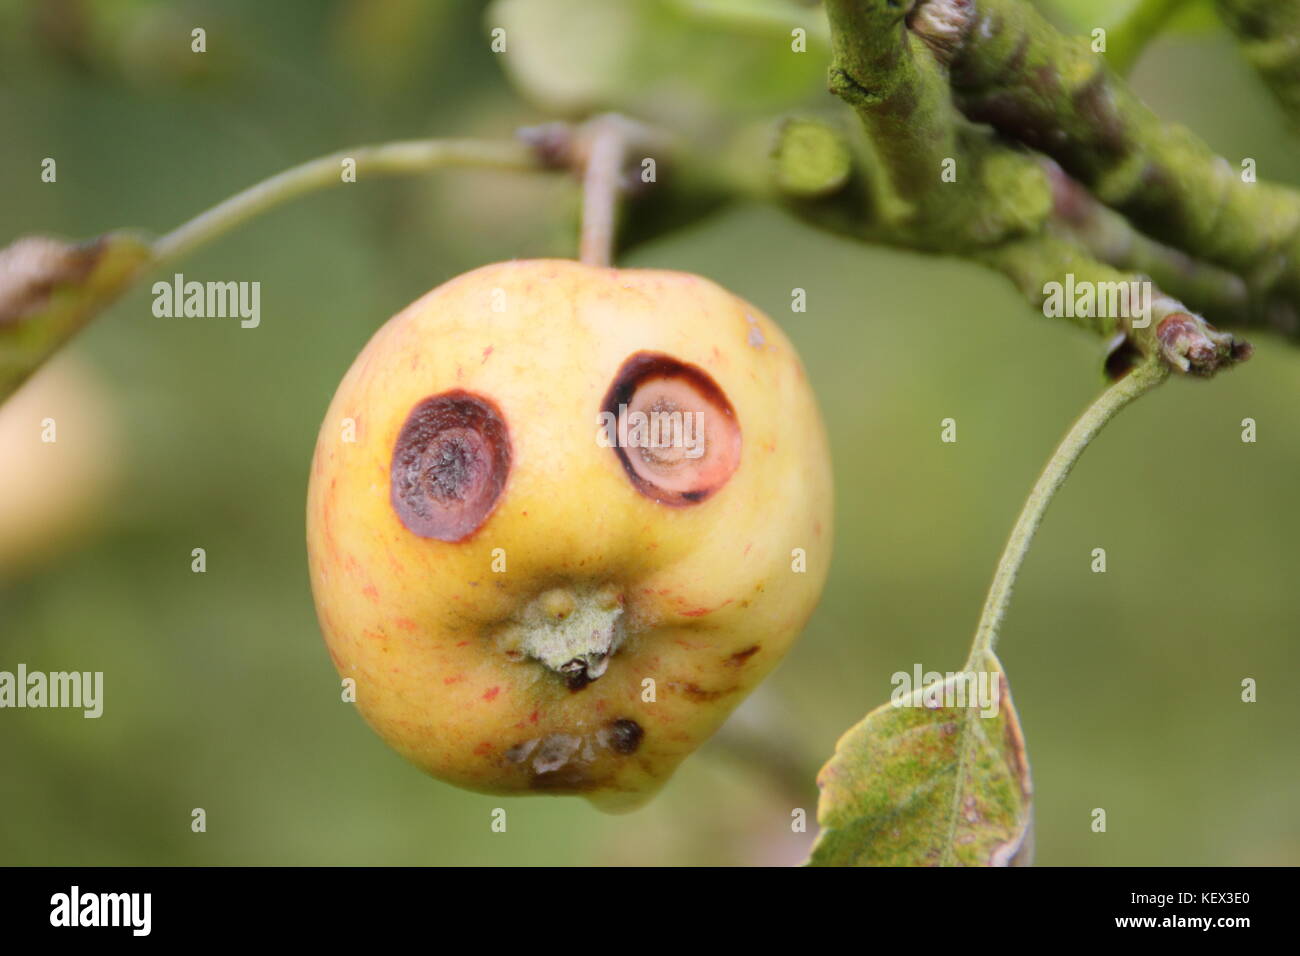 A cute little apple on a tree in an English orchard appears to have a funny face, with wide eyes caused by fruit scab, a fungal disease of fruit trees Stock Photo